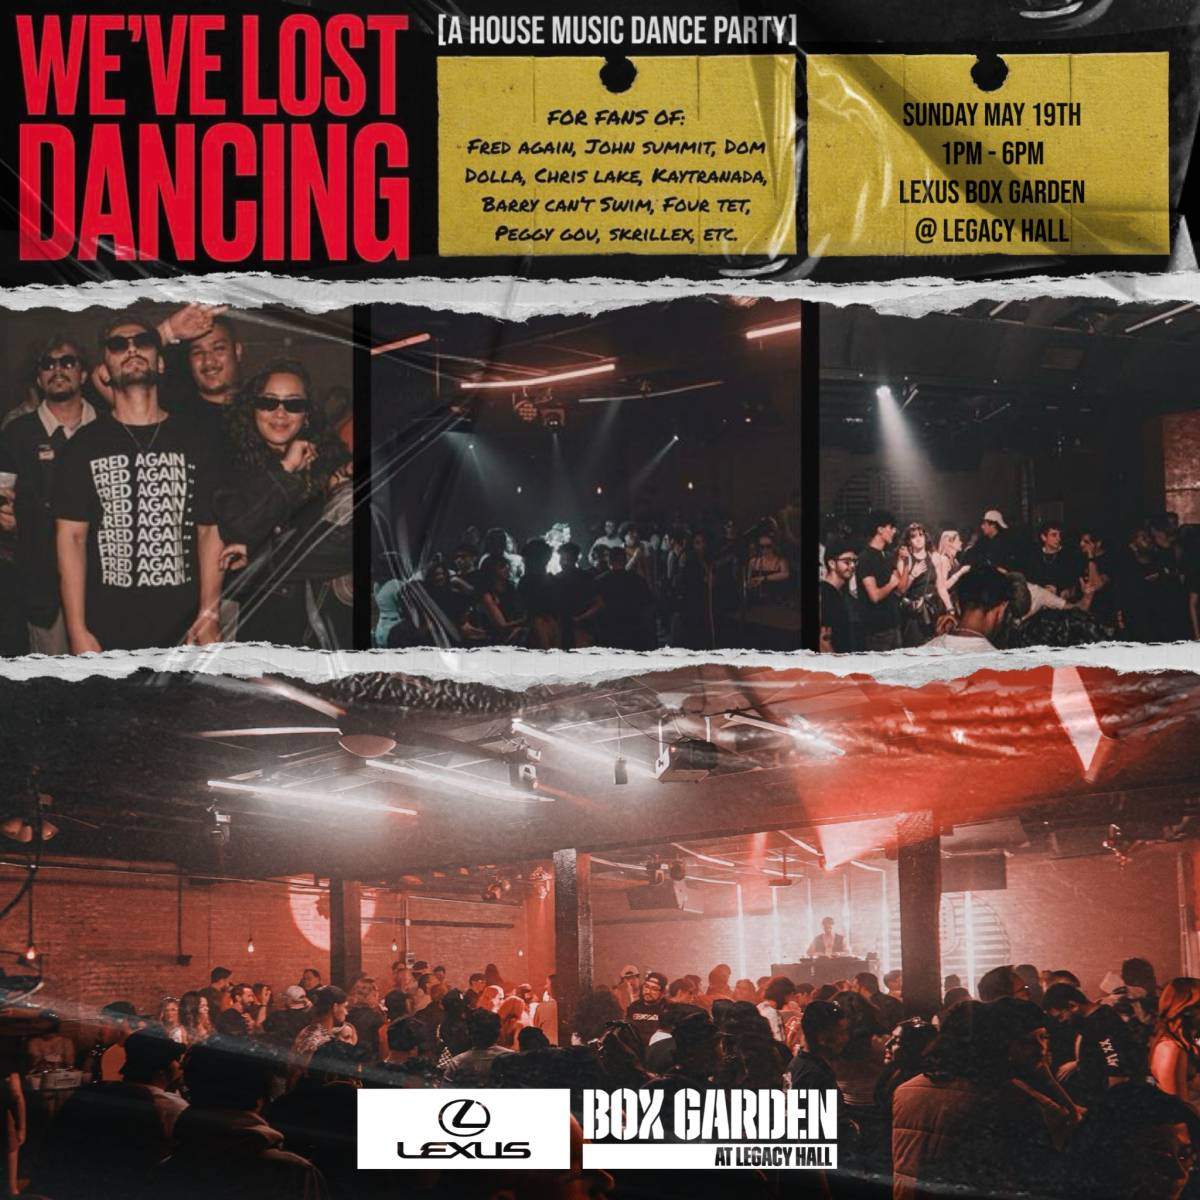 We've Lost Dancing - House Music BRUNCH Party - Página frontal